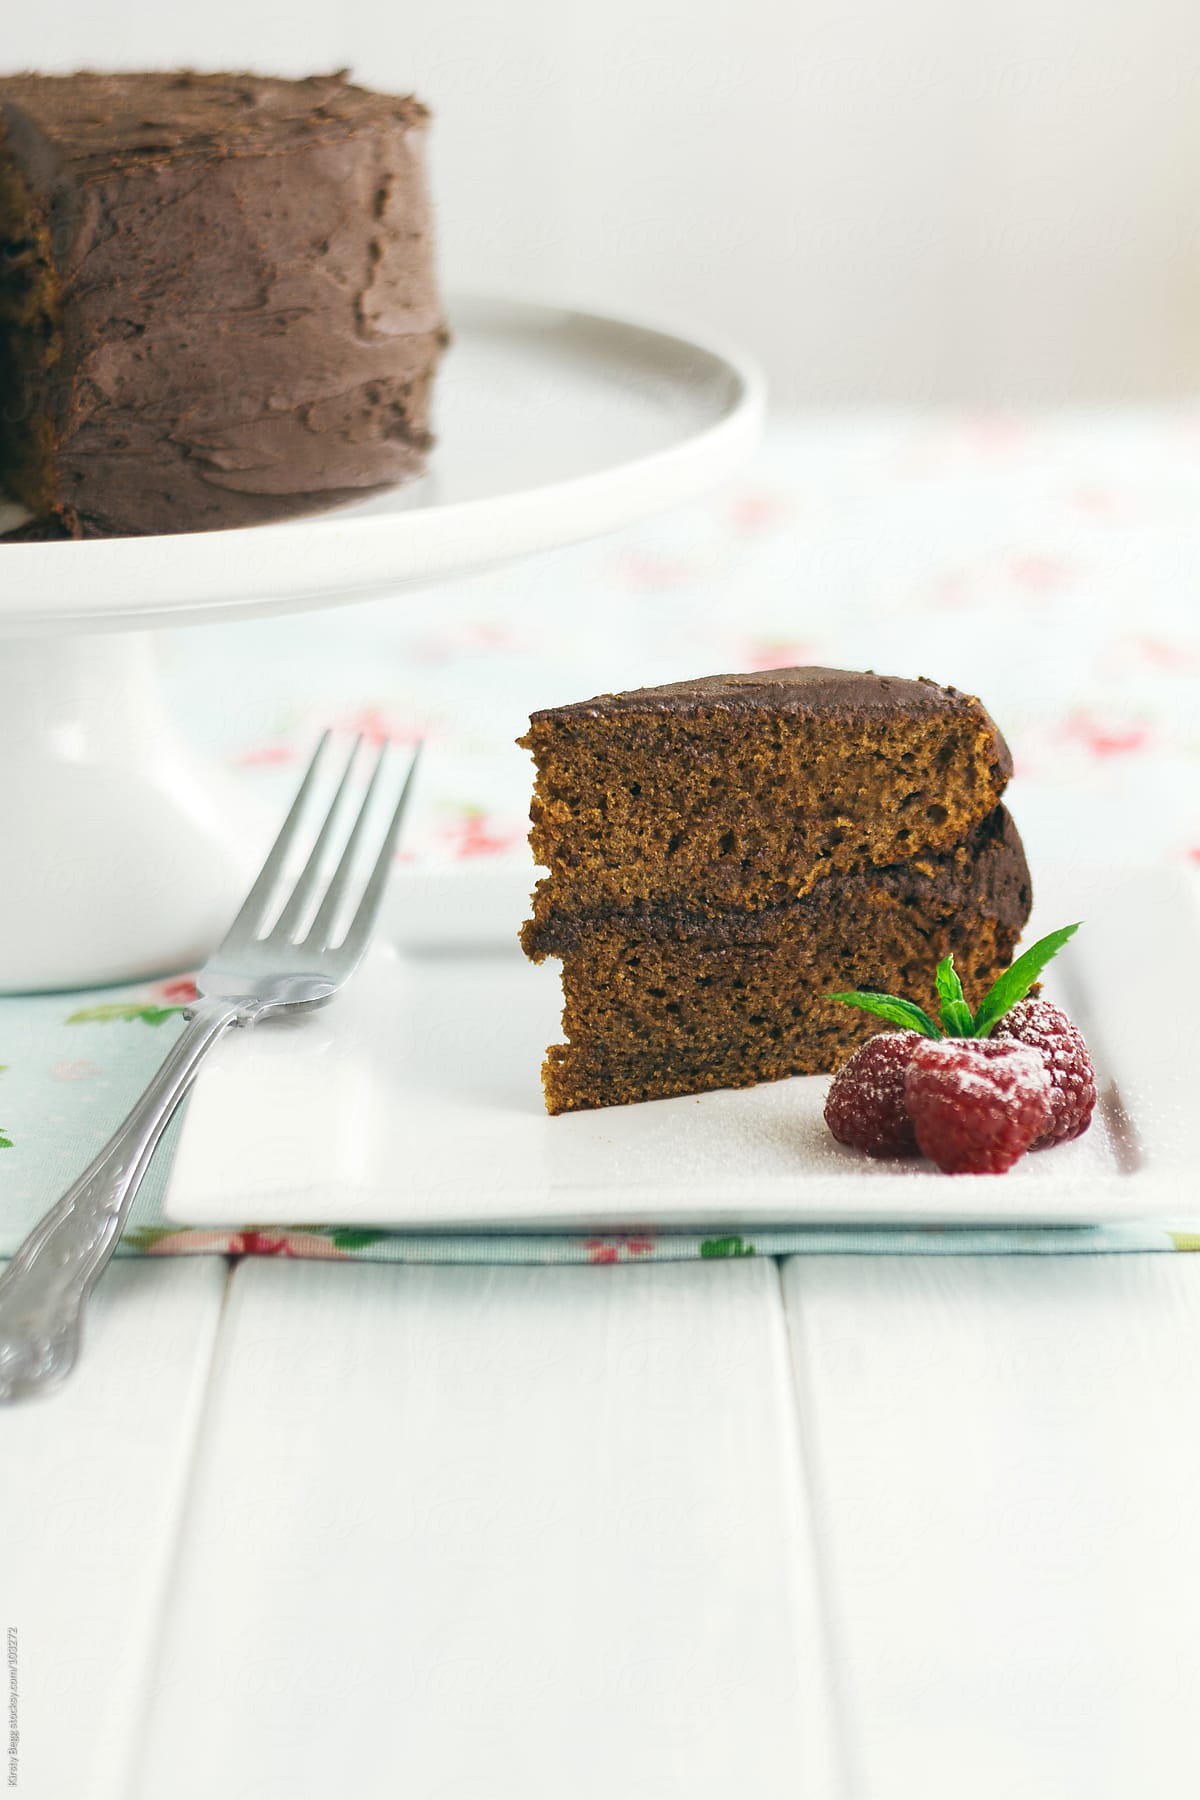 Slice of chocolate cake with copy space in foreground